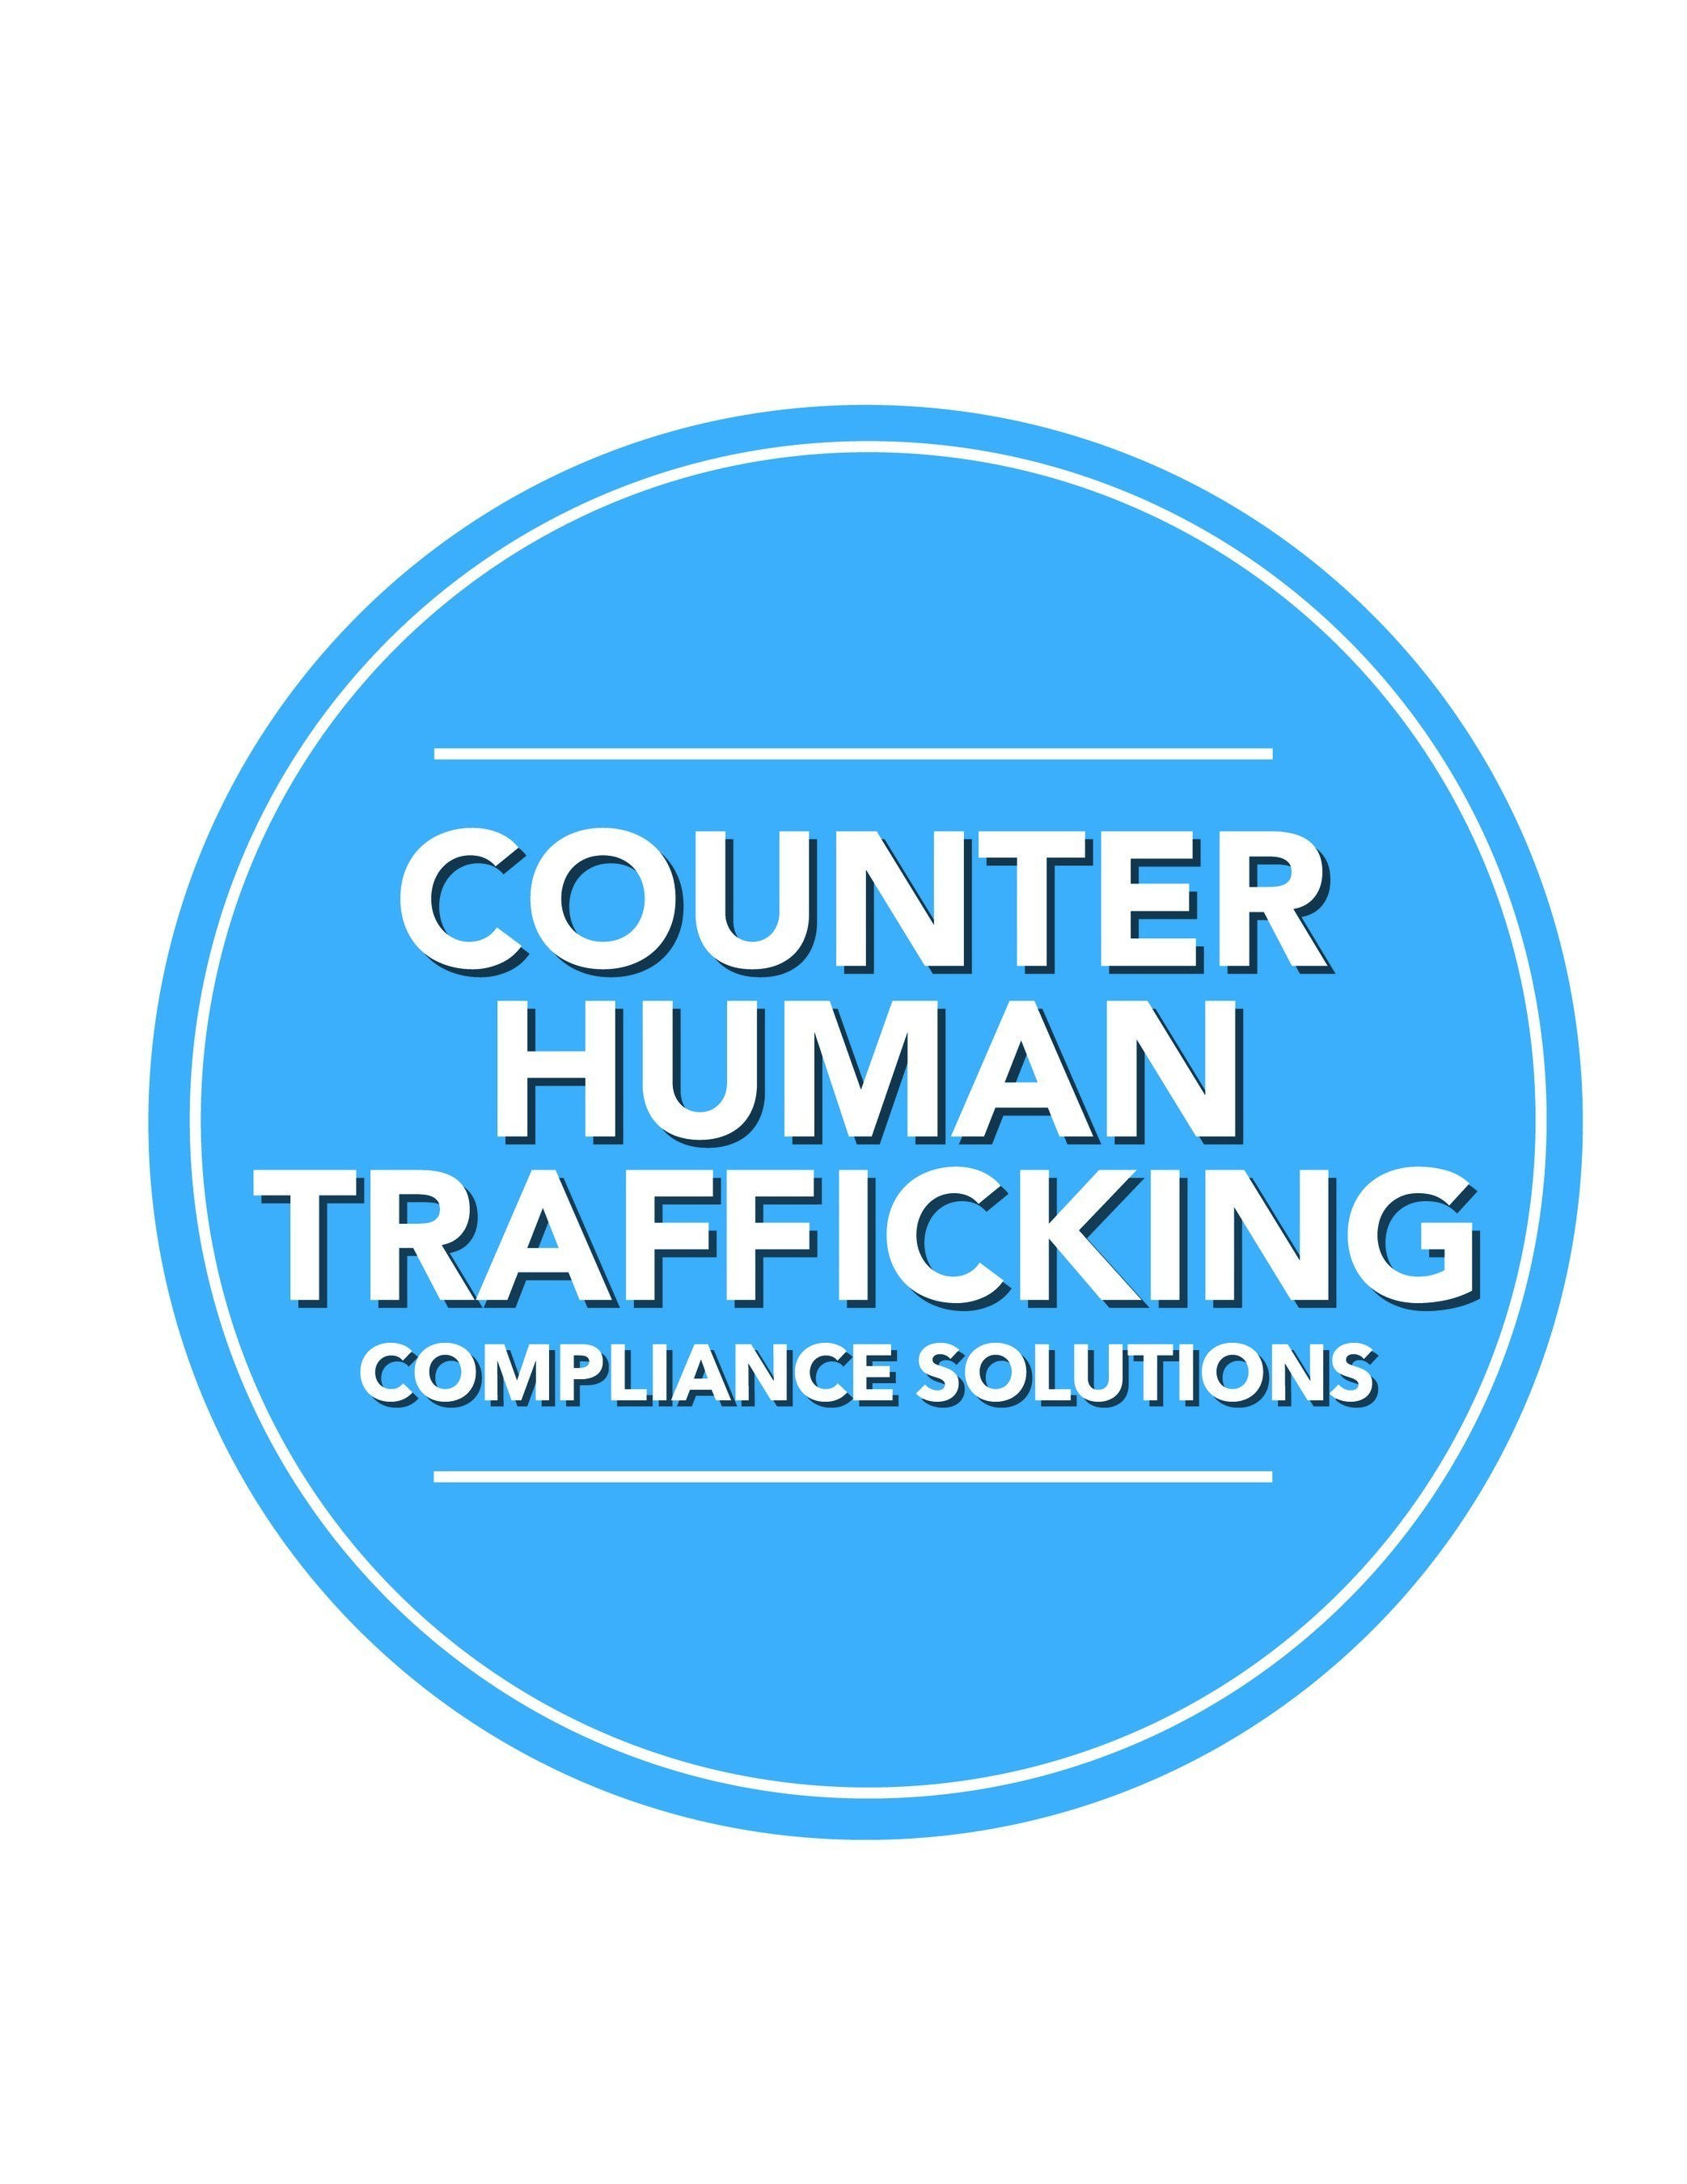 Linda Rizk, Thomas A. Rizk, and Rizk Ventures Launch Counter Human Trafficking Compliance Solutions, a Global Compliance and Advisory Company